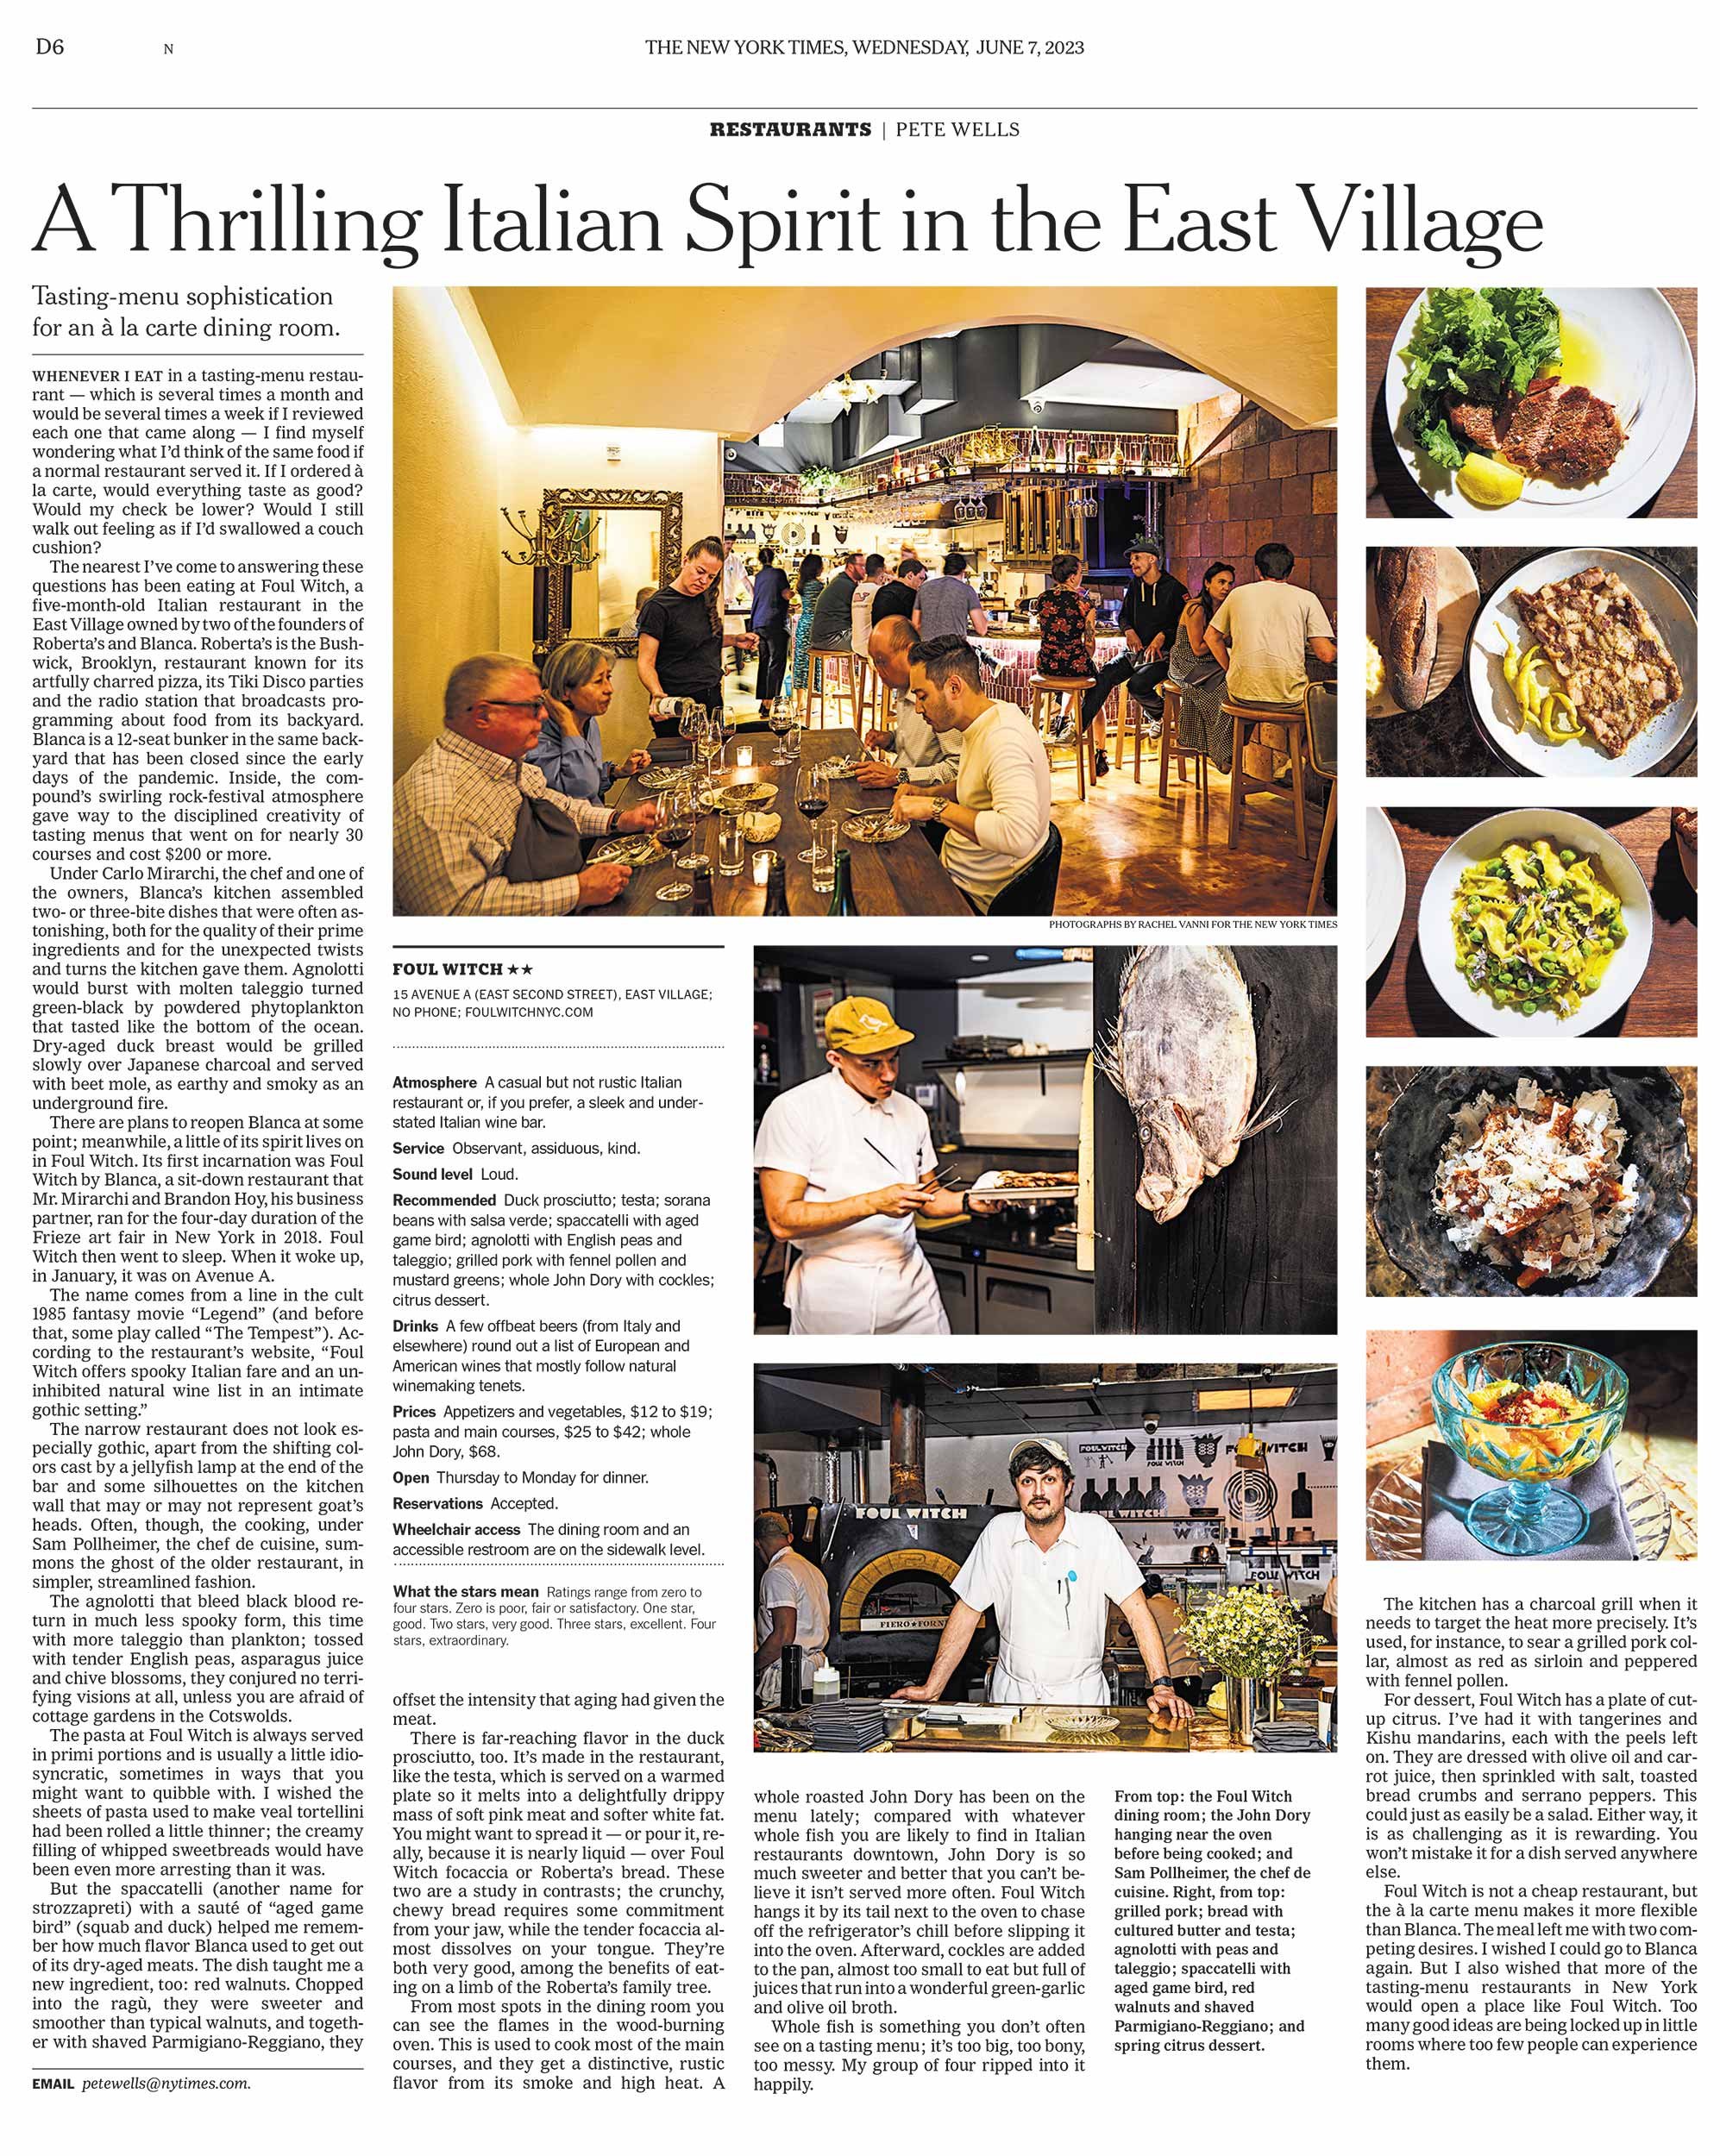 nyc-nj-food-editorial-photographer-nytimes-foul-witch-tearsheet.jpg